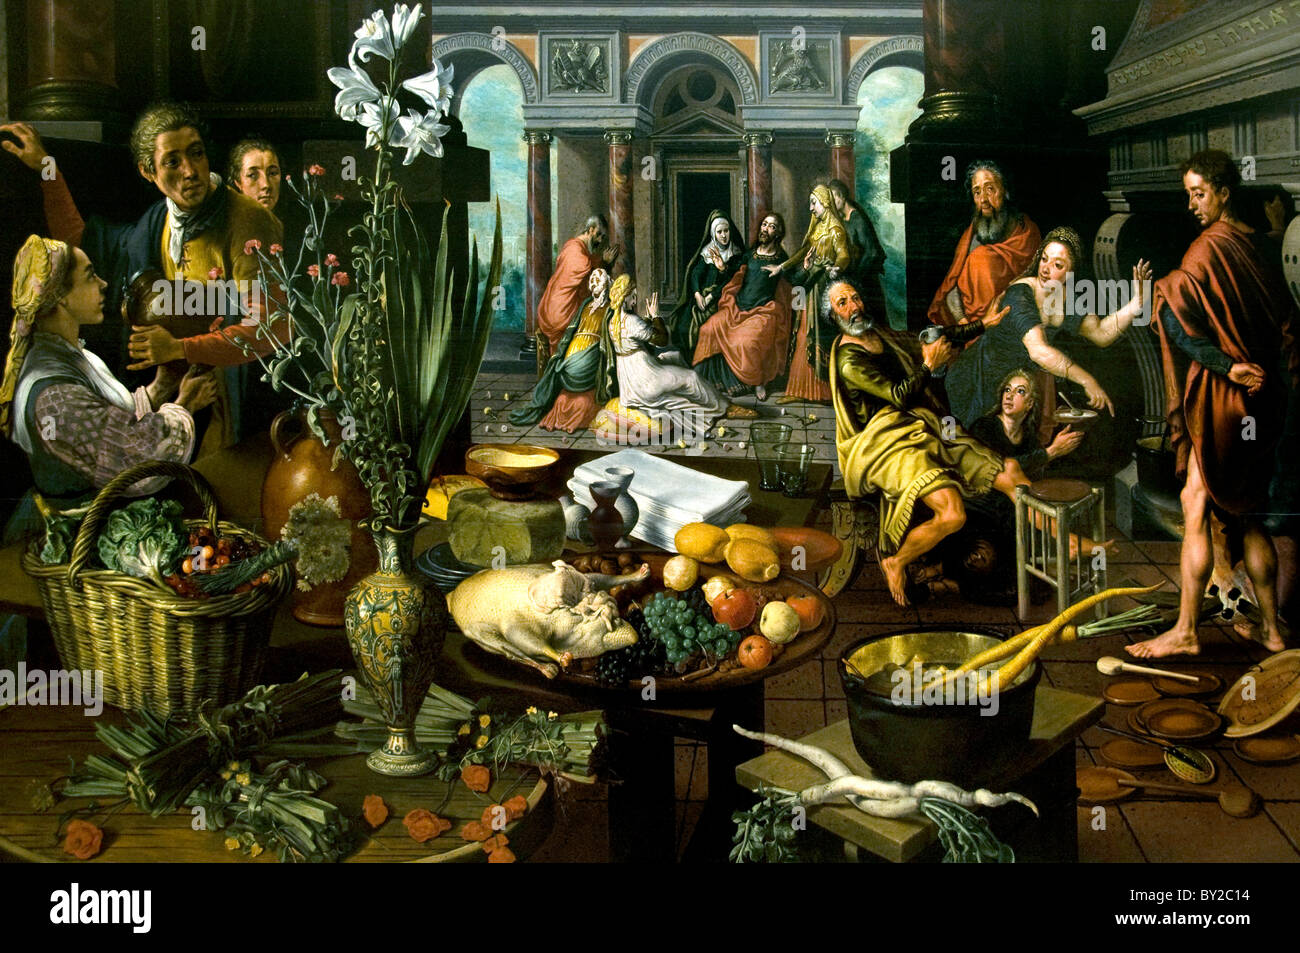 Christ in the house of Martha and Mary 1553 Pieter Aertsen  (1508/09 - 1575 Amsterdam) The, Netherlands, Dutch, Stock Photo